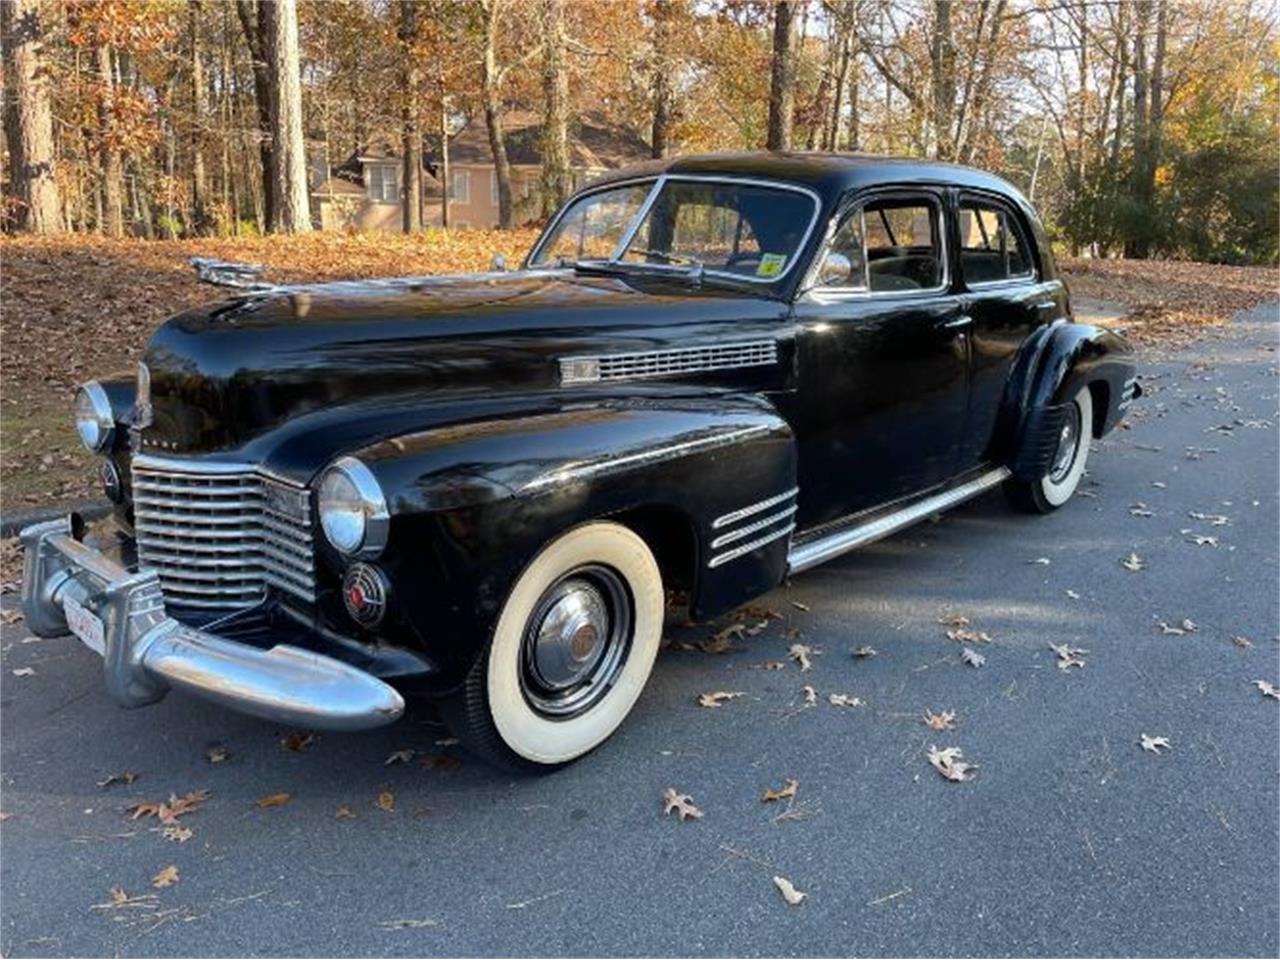 For Sale: 1941 Cadillac Series 62 in Cadillac, Michigan for sale in Cadillac, MI